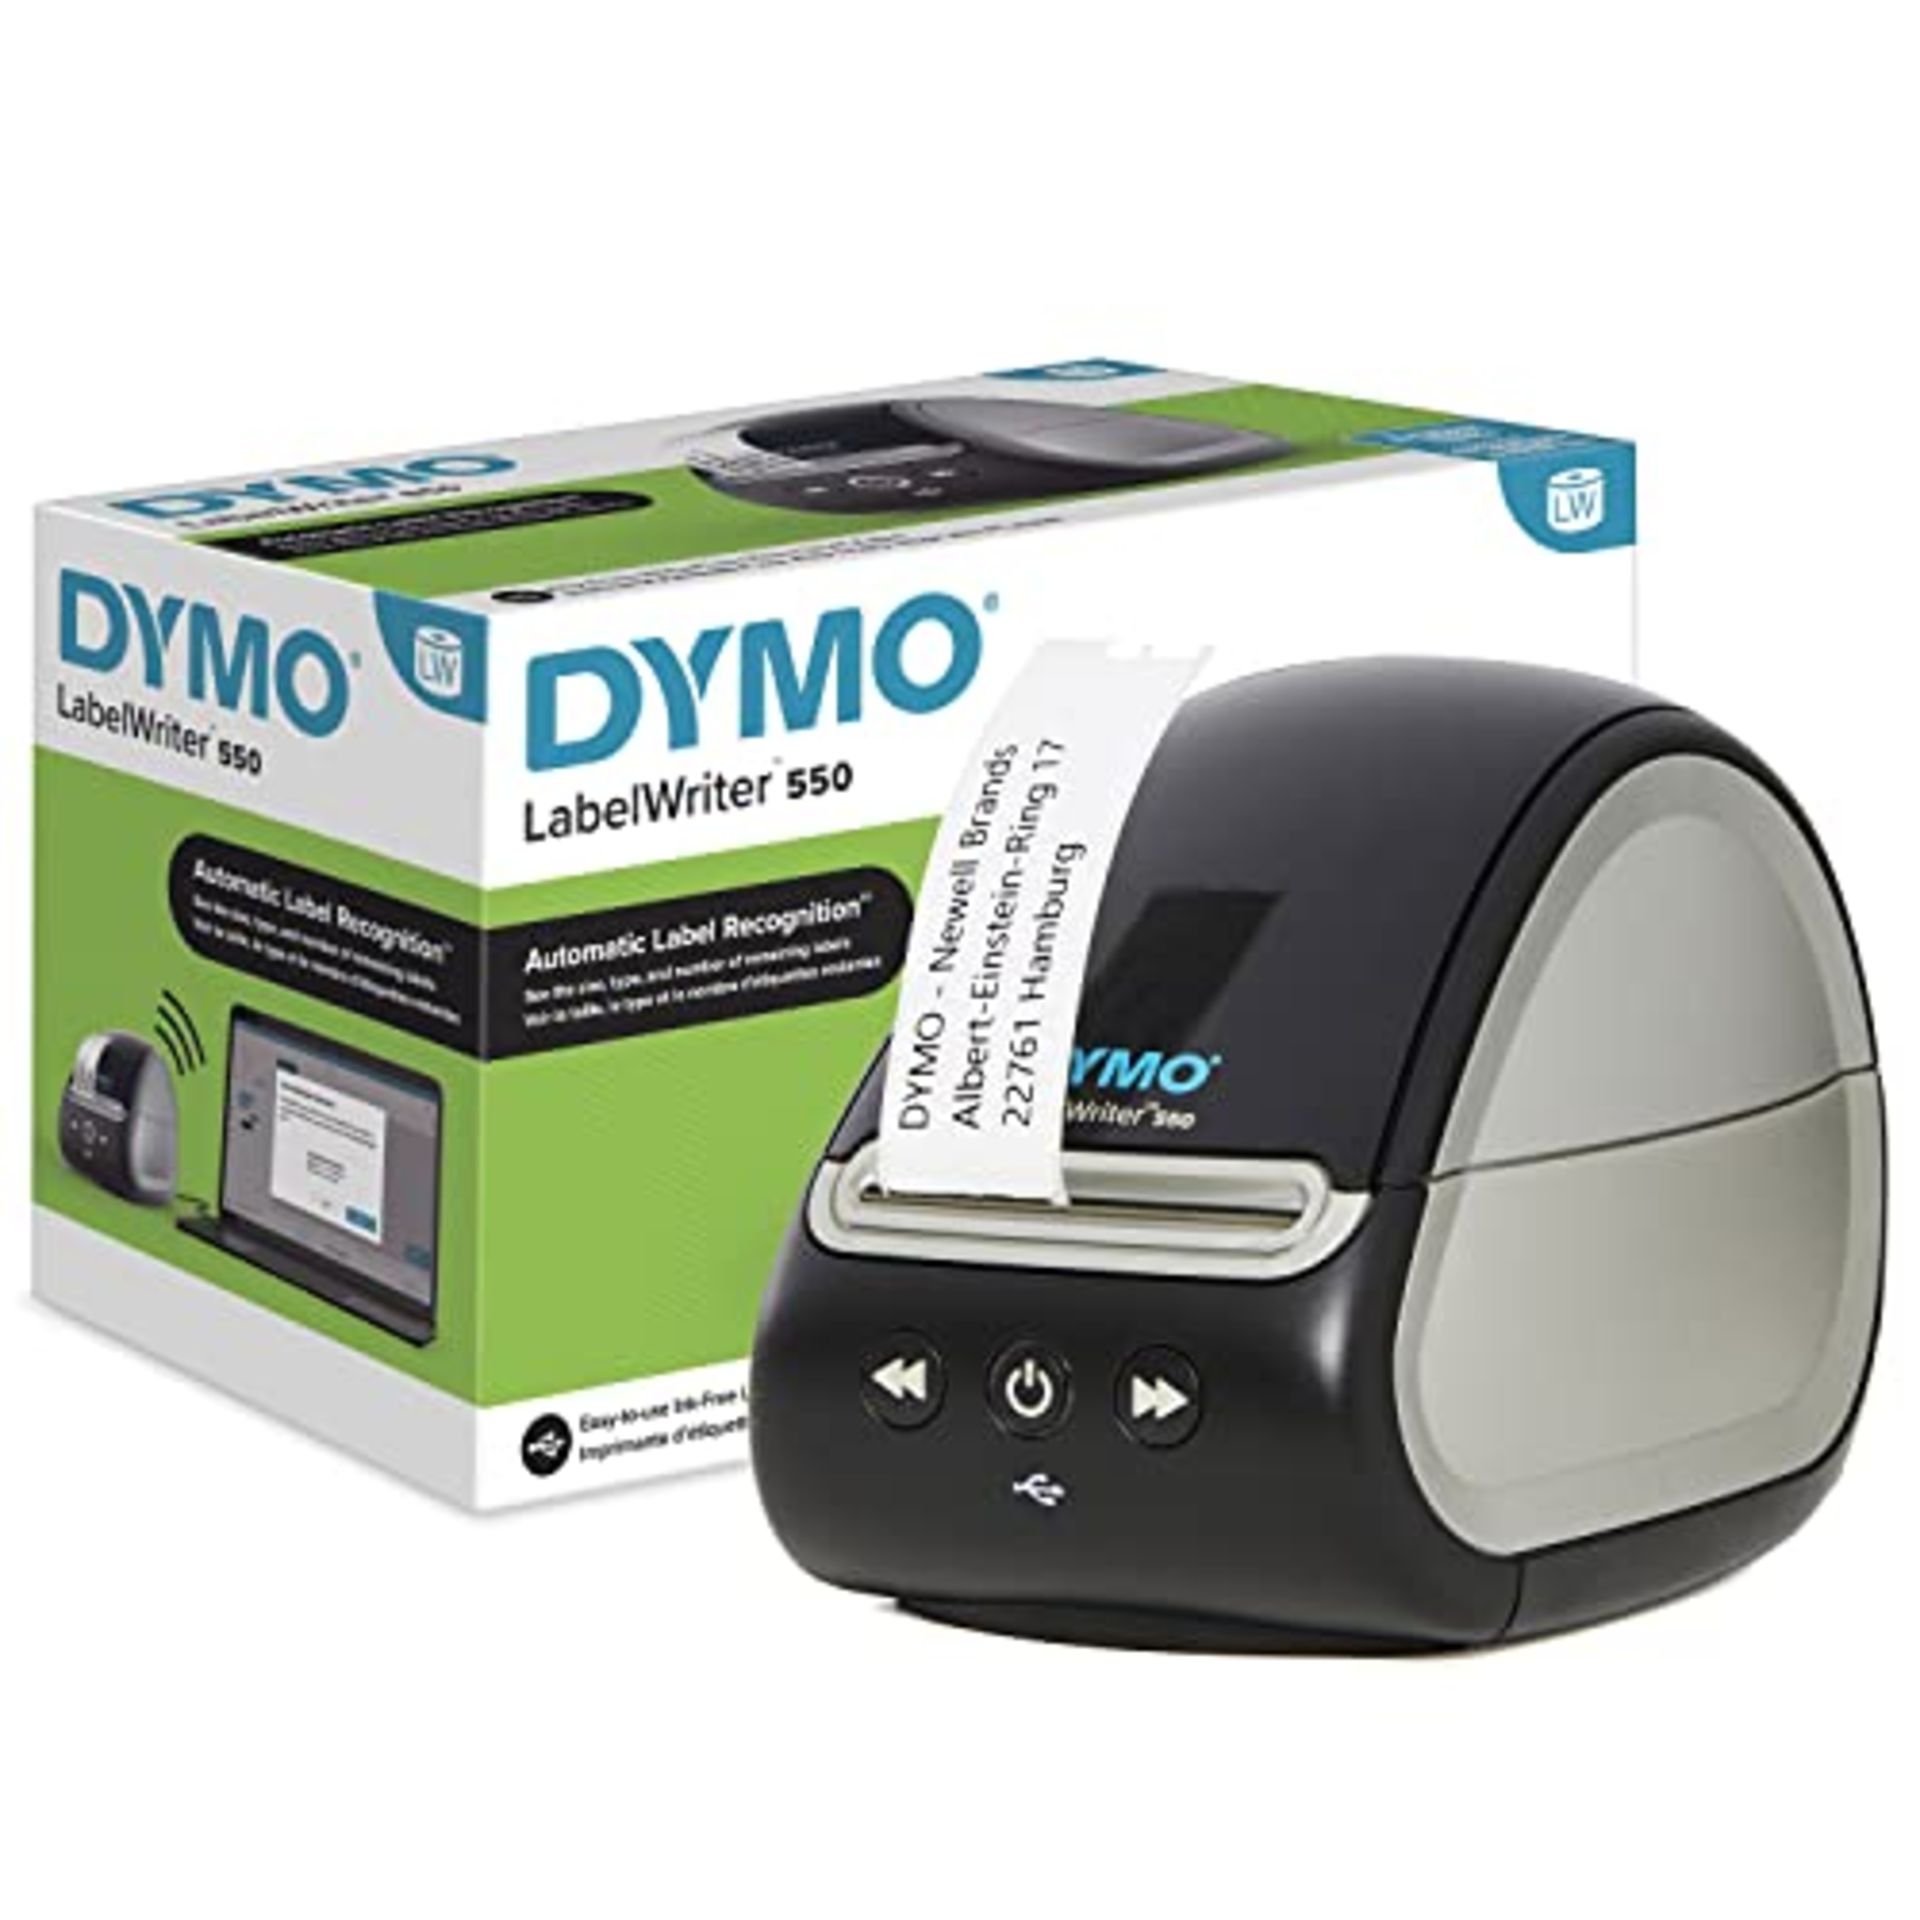 RRP £78.00 DYMO LabelWriter 550 Label Printer | Label Maker with Direct Thermal Printing | Automa